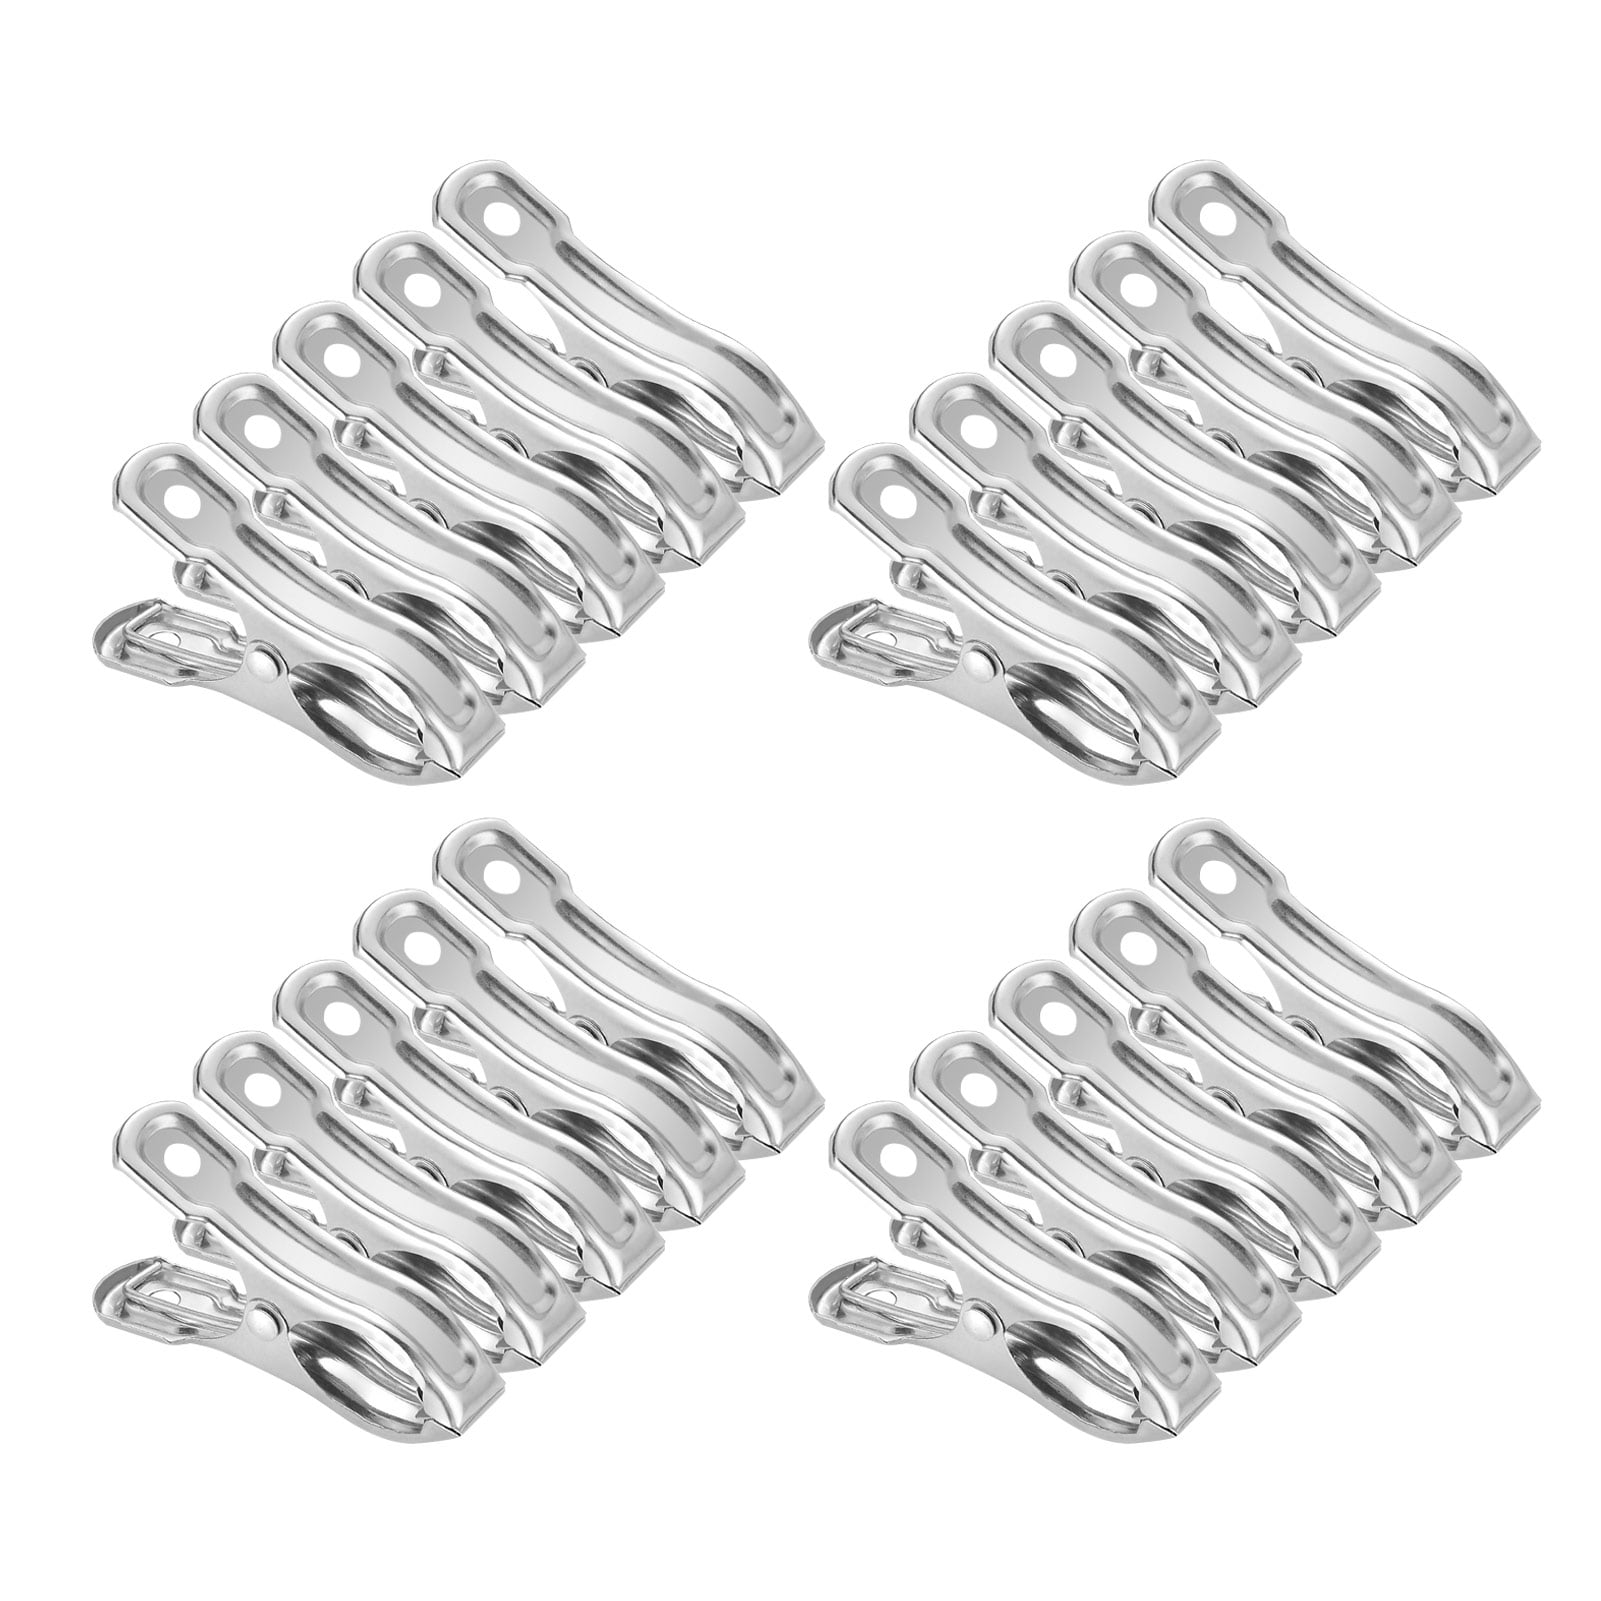 Greenhouse Clips with Strong Grip for Fixing Shade Cloth or Plant Cover on Garden Hoops Greenhouse Hoops Stainless Steel Greenhouse Clamps 55 Pcs Heavy Duty Garden Clips 